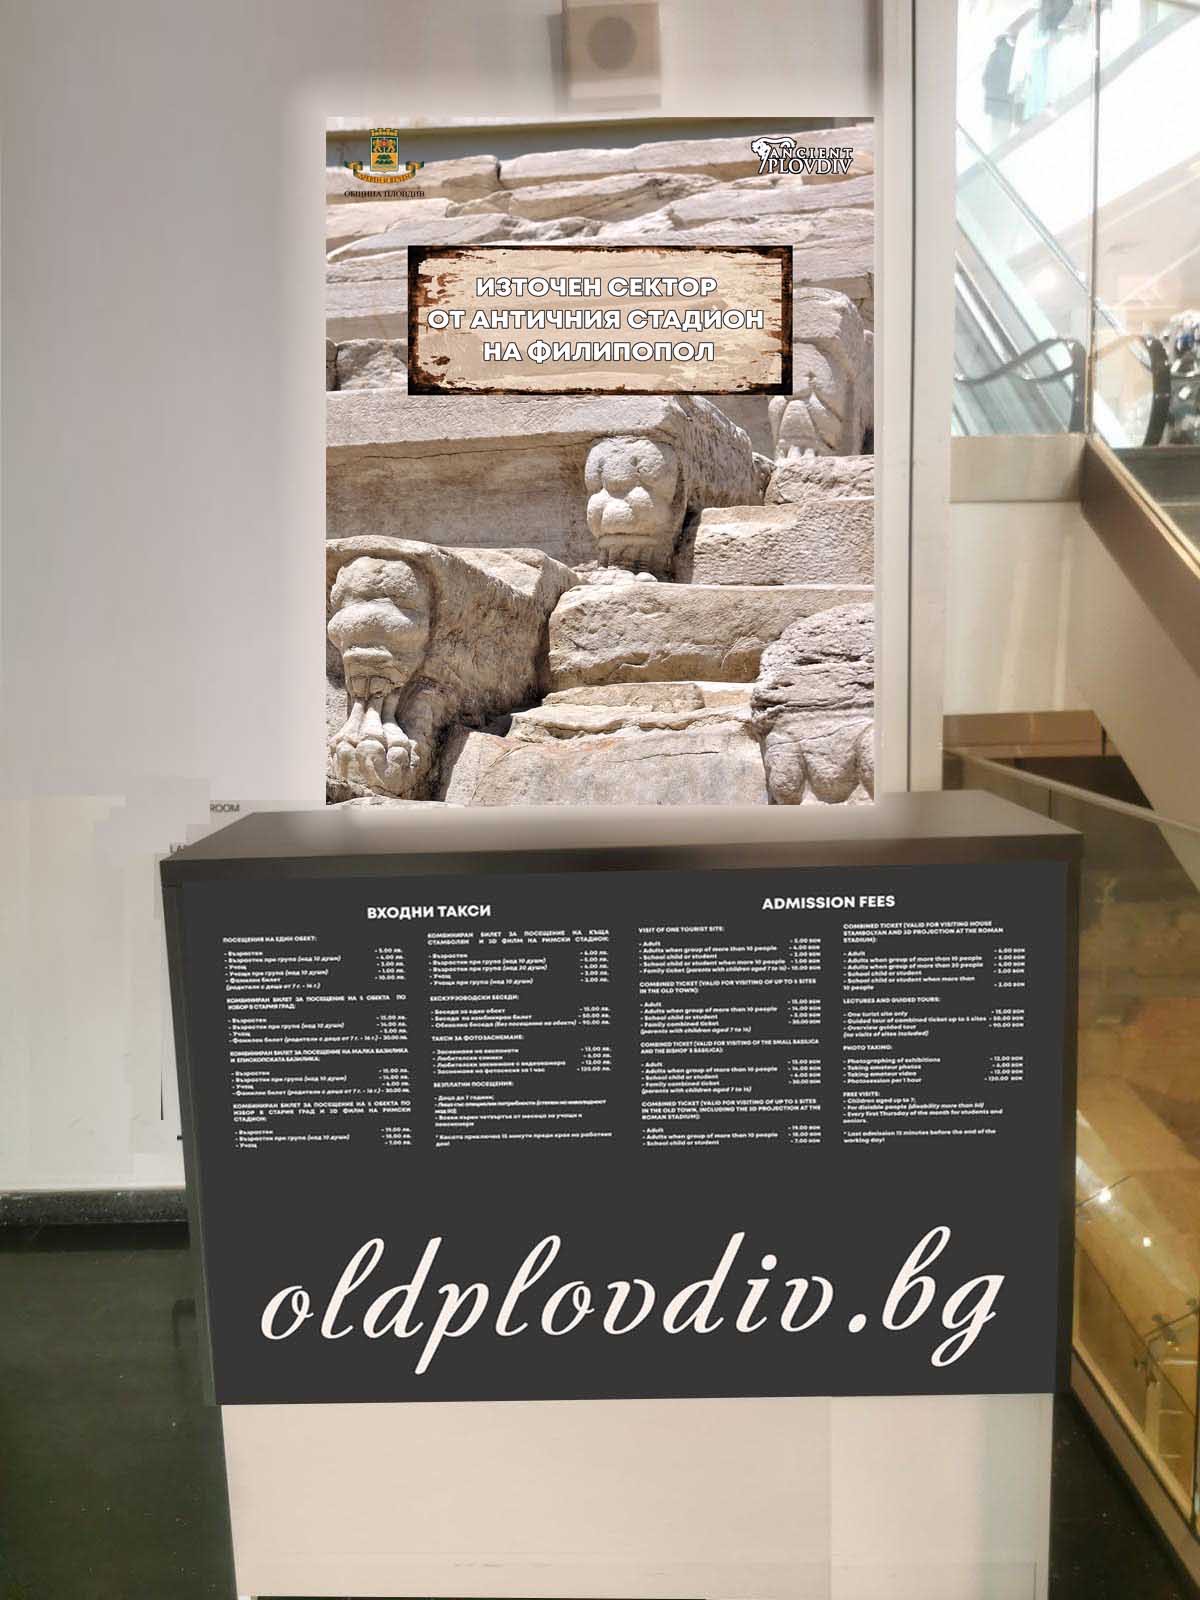 The Eastern Sector of the Ancient Stadium of Philippopolis opens on September 27